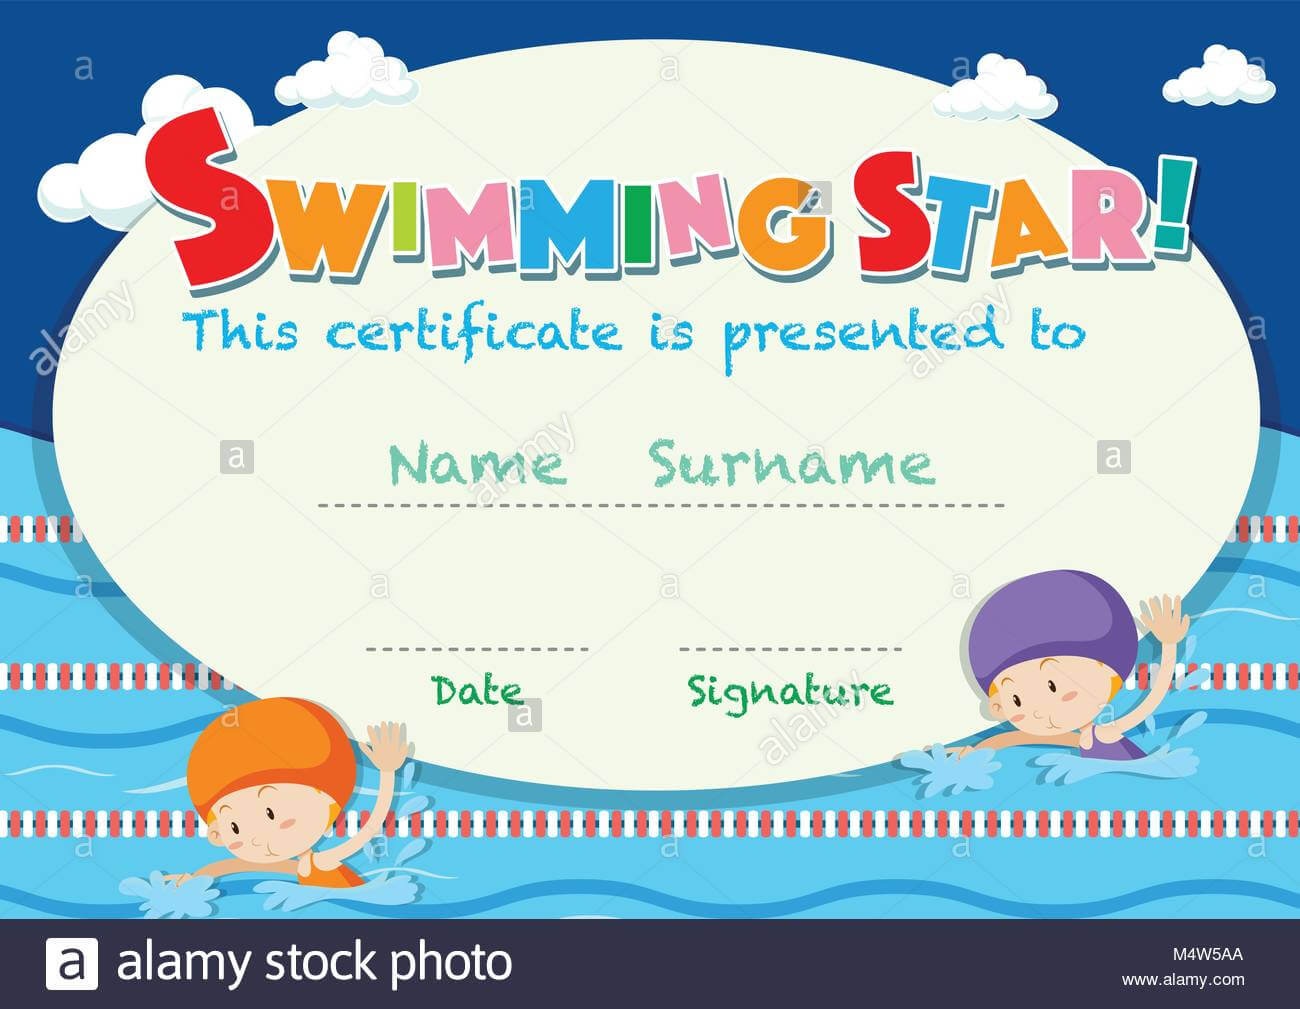 Certificate Template With Kids Swimming Illustration Stock With Regard To Swimming Award Certificate Template